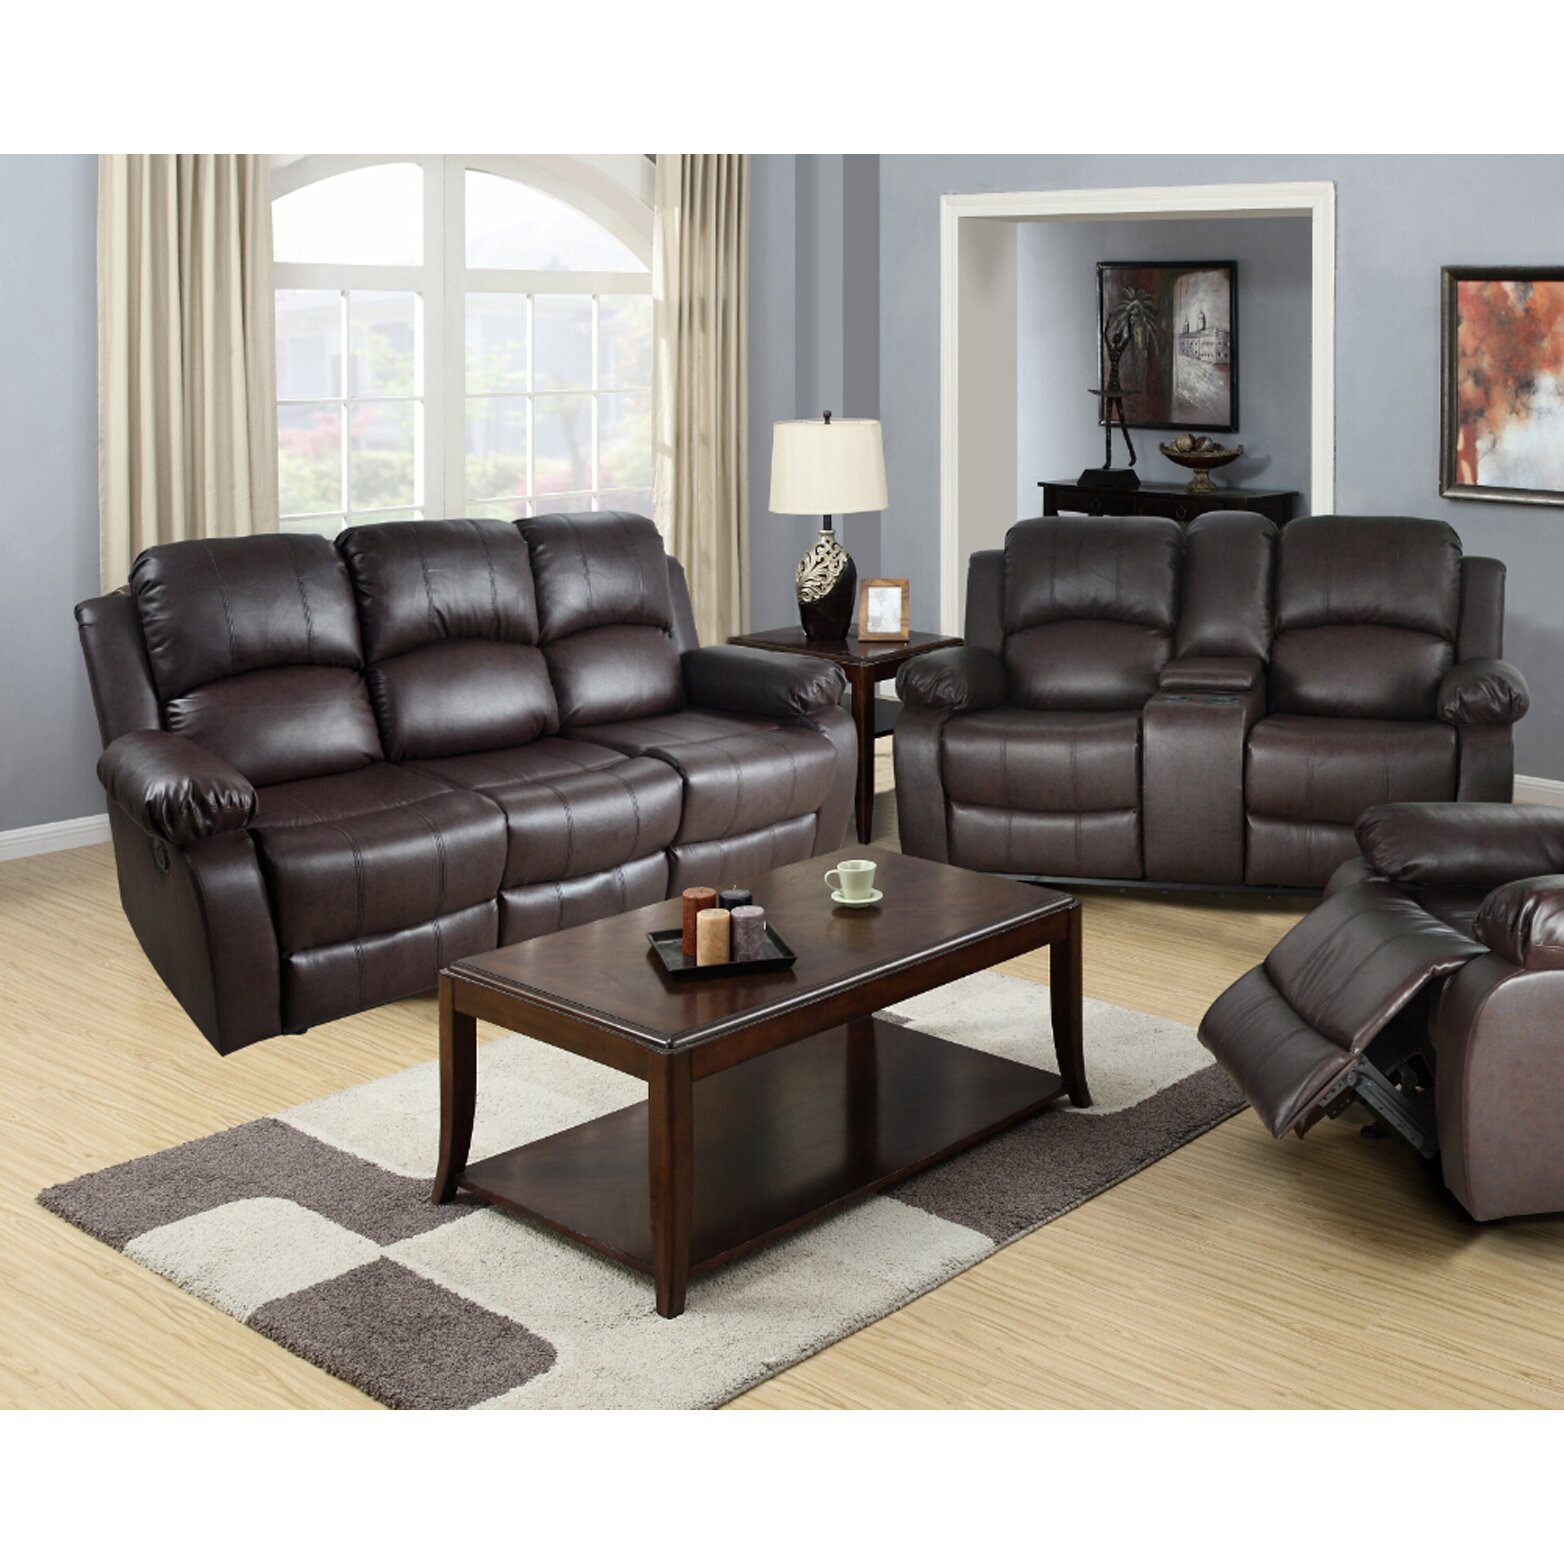 Beverly Fine Furniture Amado 2 Piece Leather Reclining Living Room Set